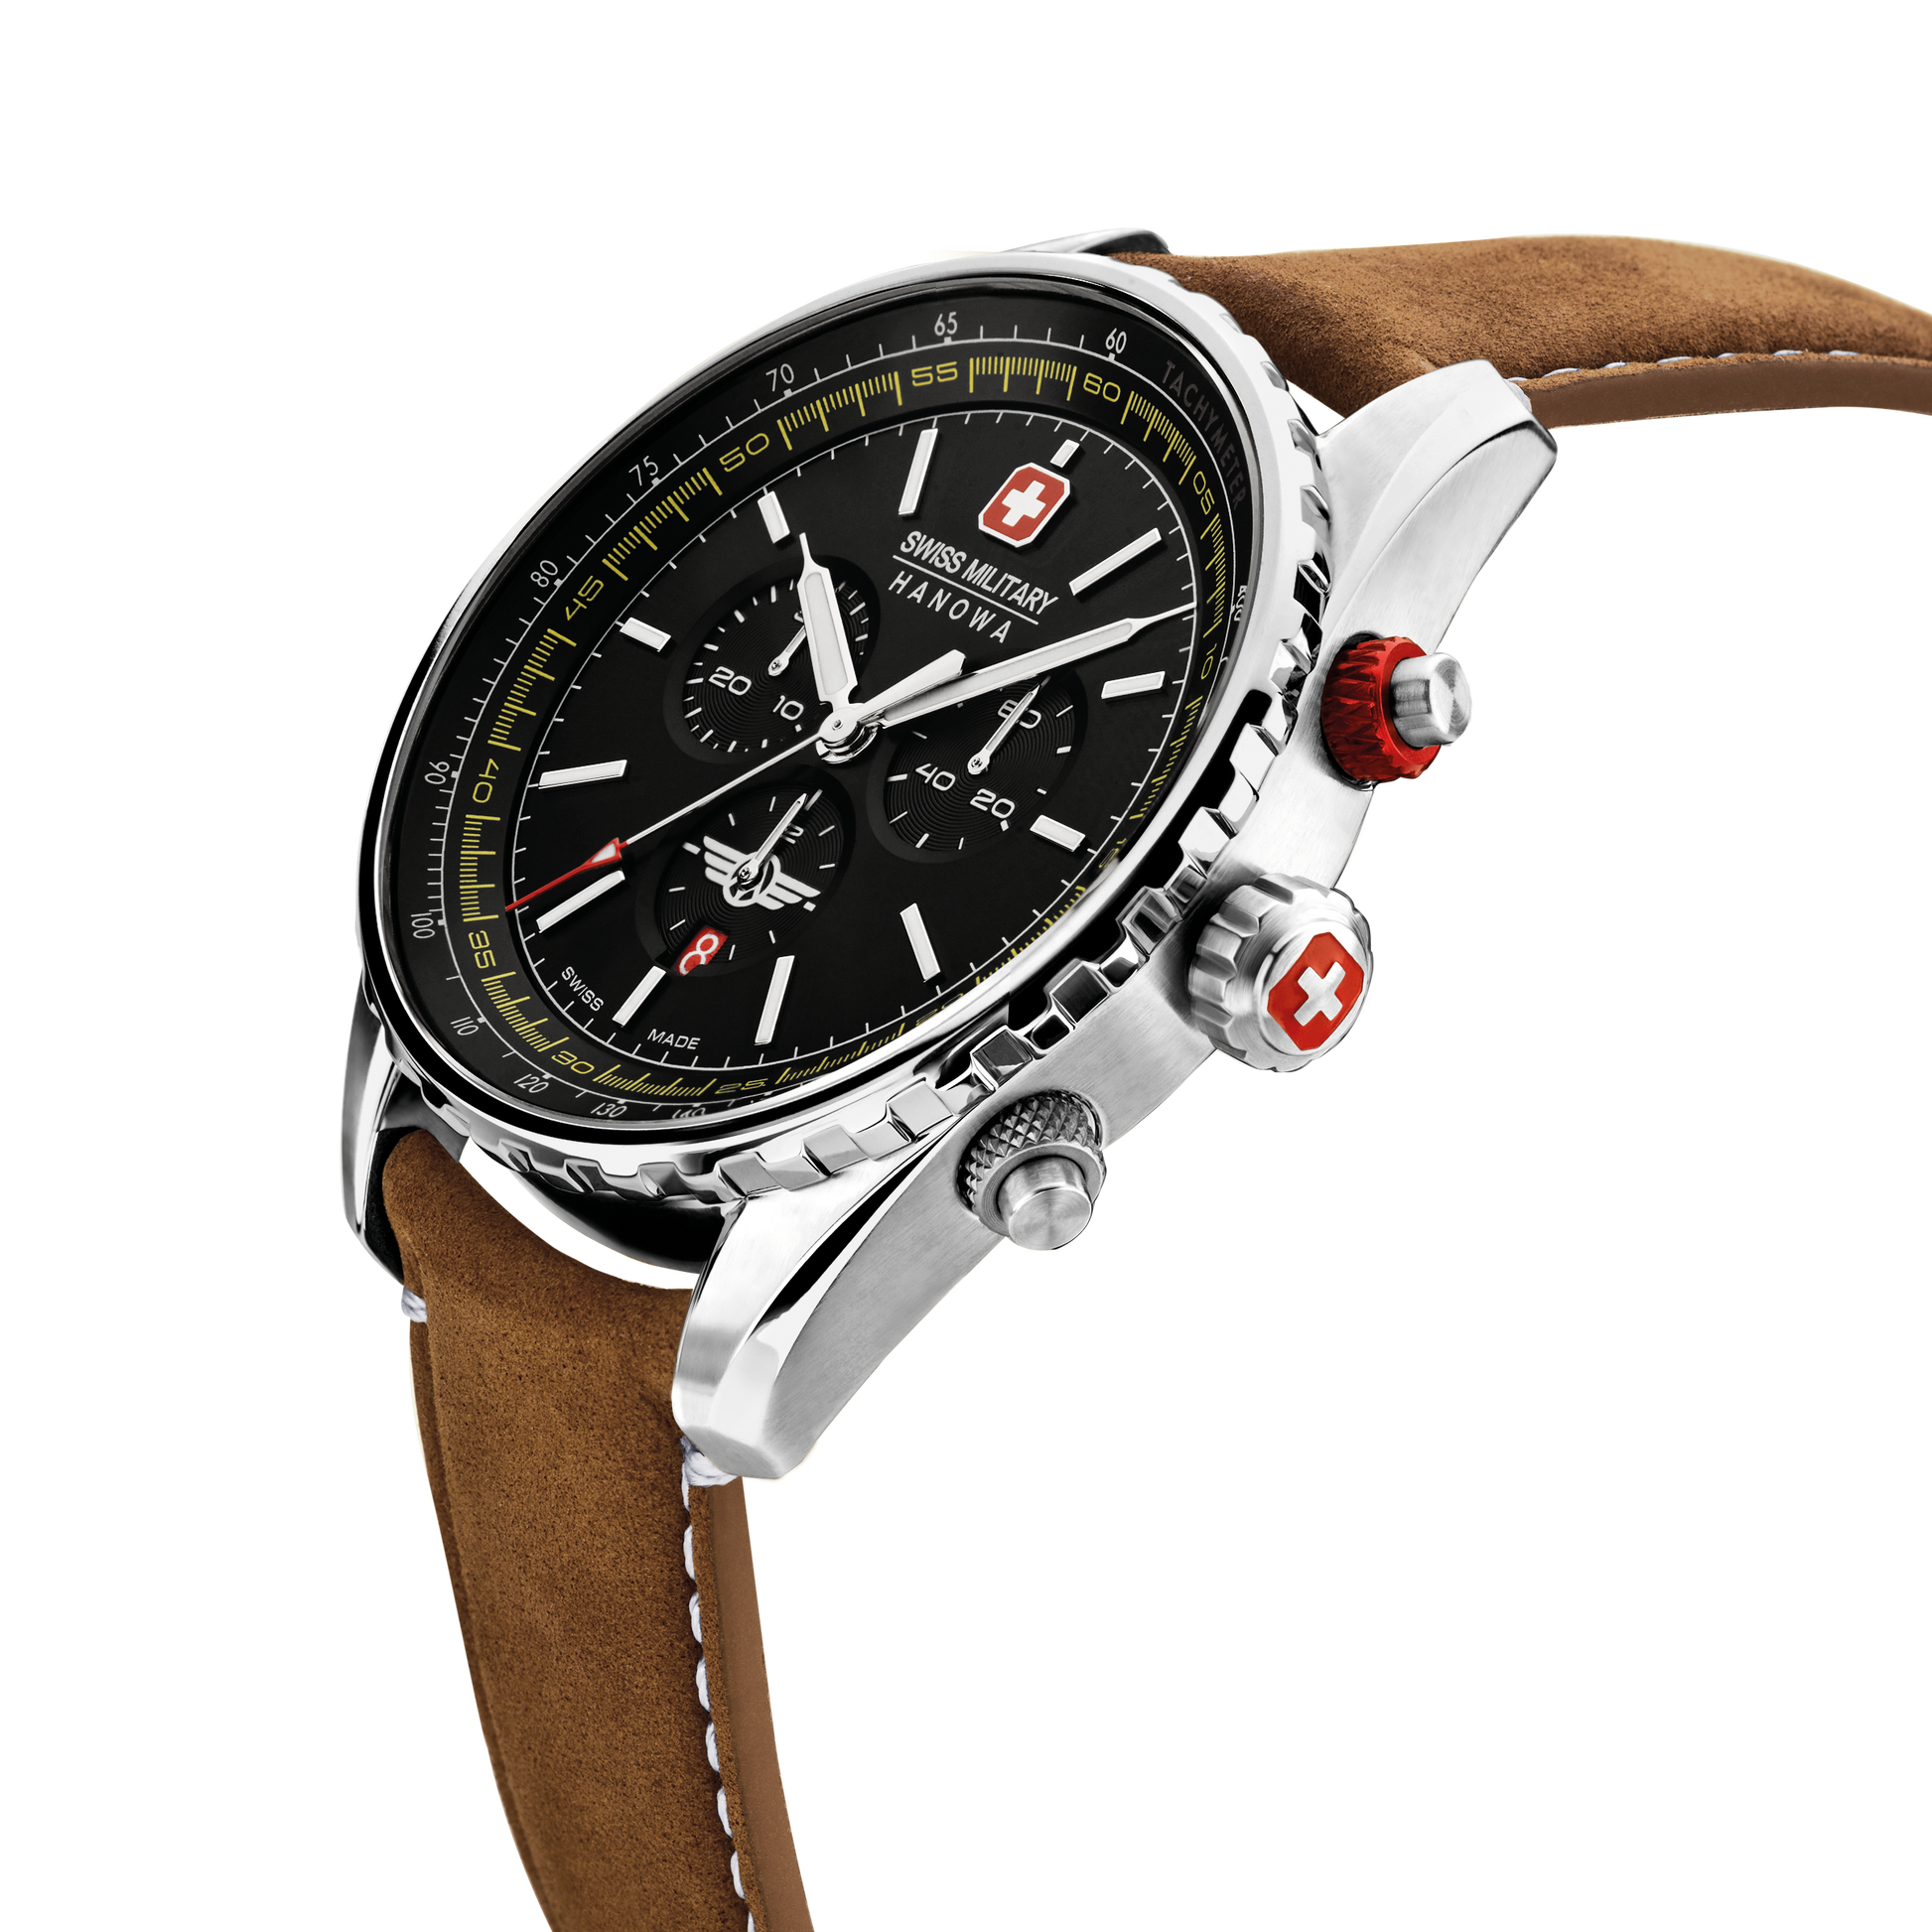 Swiss Military Hanowa Afterburn Chrono. Stainless steel case, black dial and a genuine brown Italian leather strap. Side image.